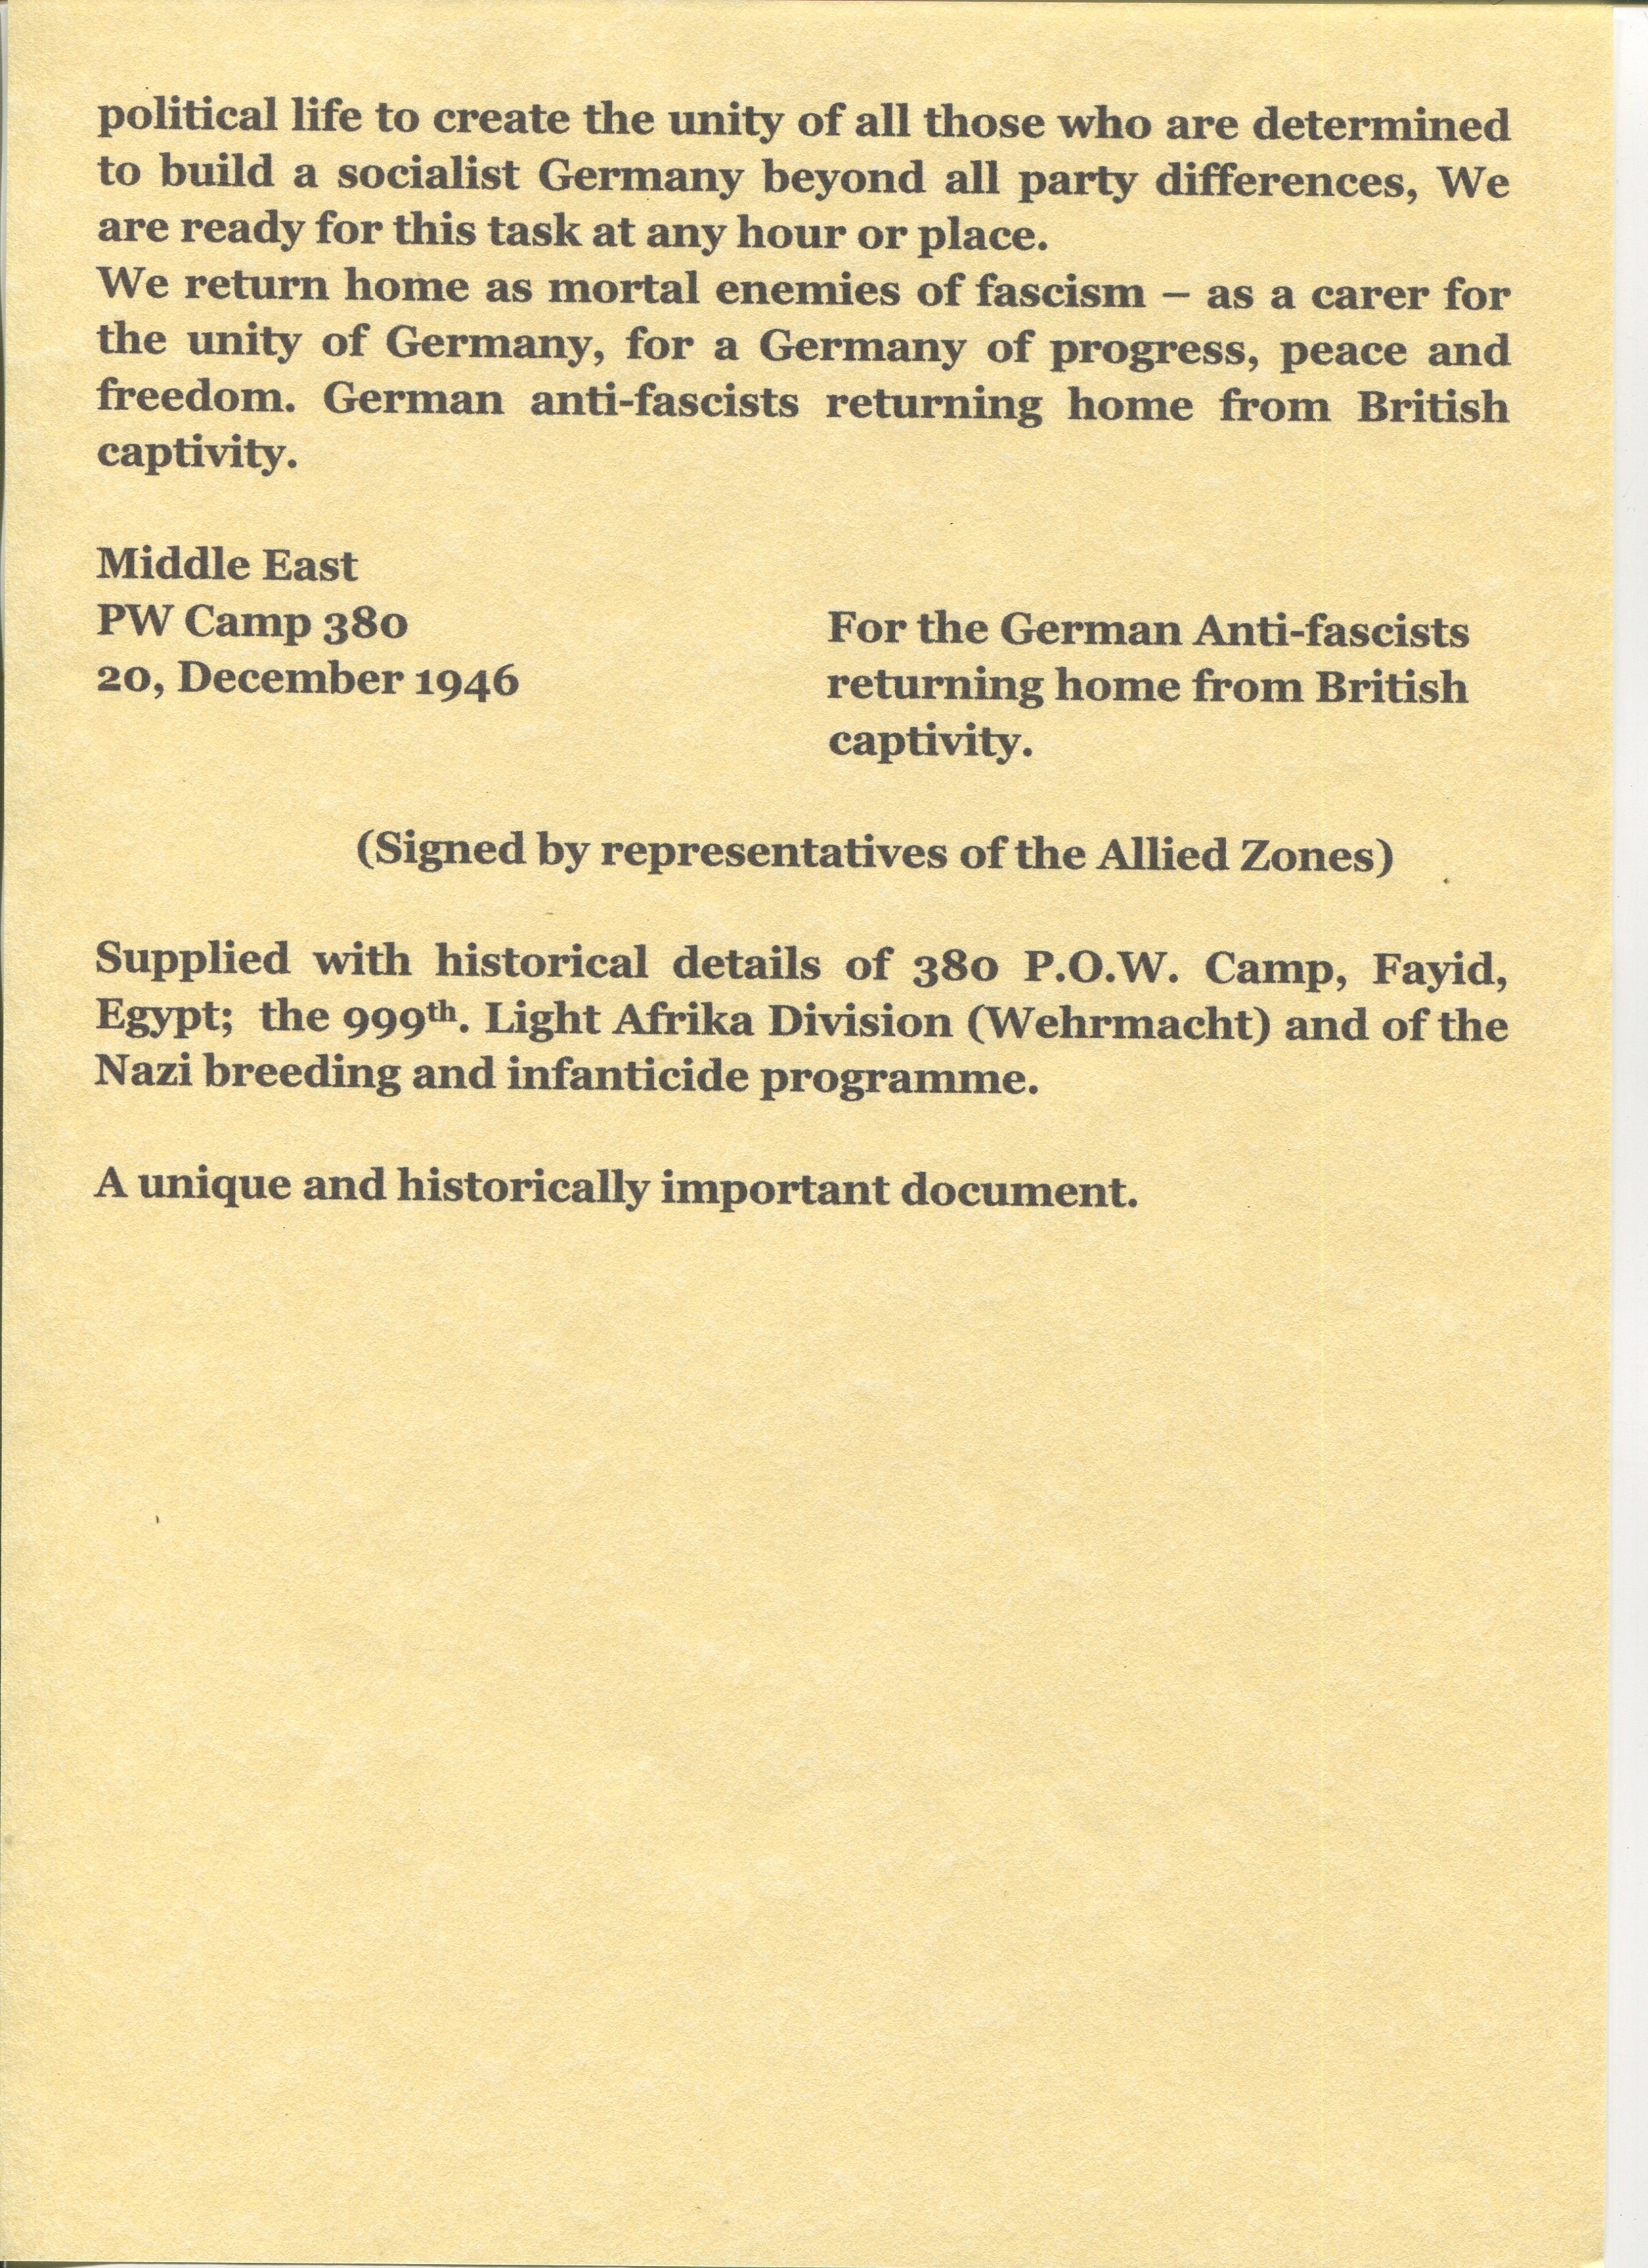 1946 ORIGINAL LETTER MIDDLE EAST PW CAMP 380 GERMAN ANTI-FASCIST SUPPLIED WITH HISTORICAL DETAILS - Image 3 of 6